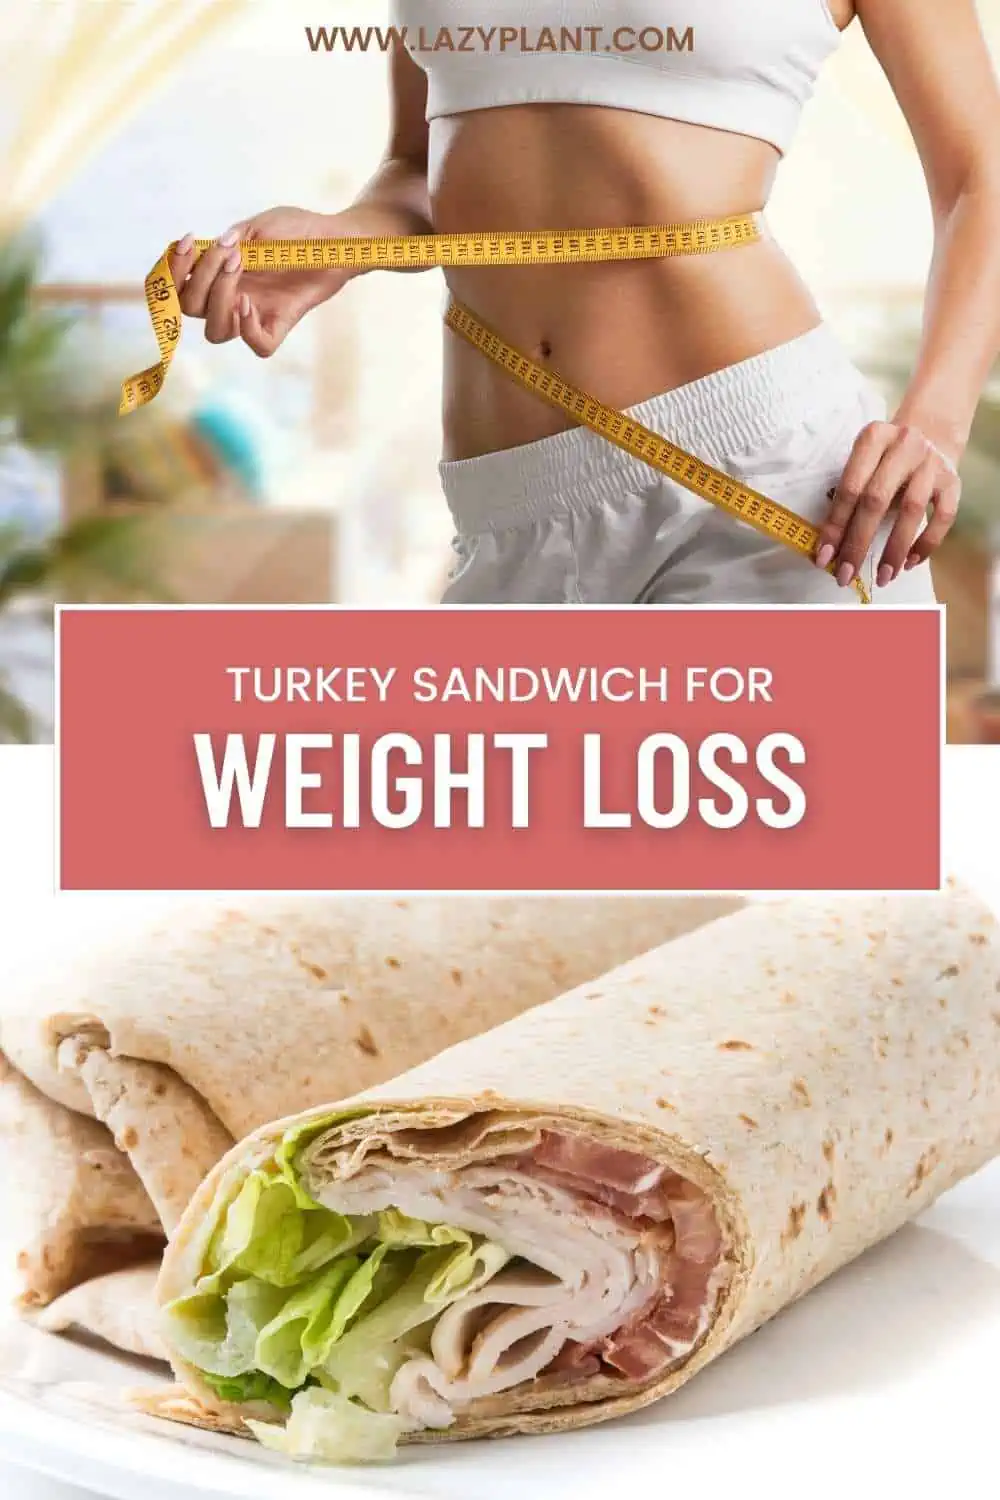 Worried about gaining weight from your beloved turkey sandwich? These tips can help you avoid it.